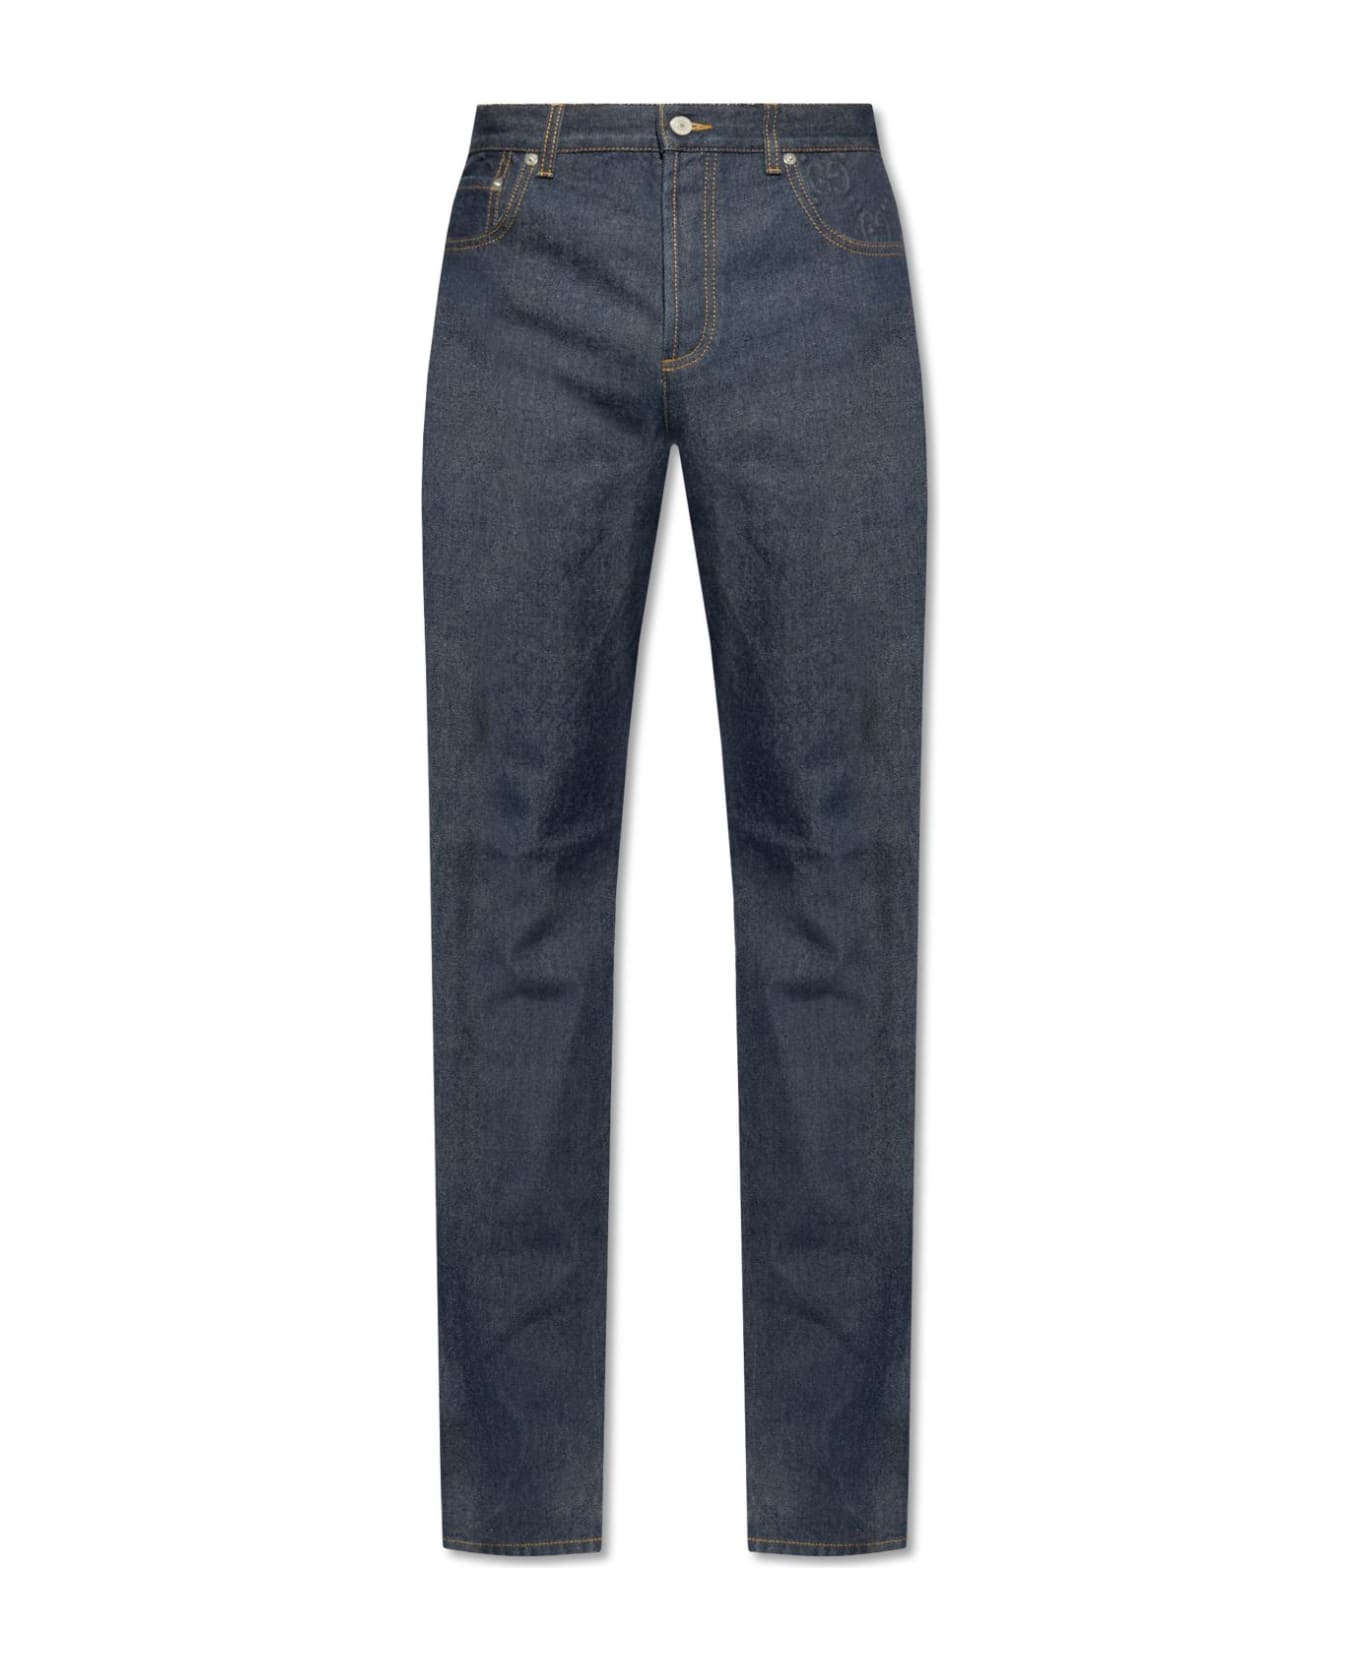 Gucci Jeans With Straight Legs - DARKBLUE